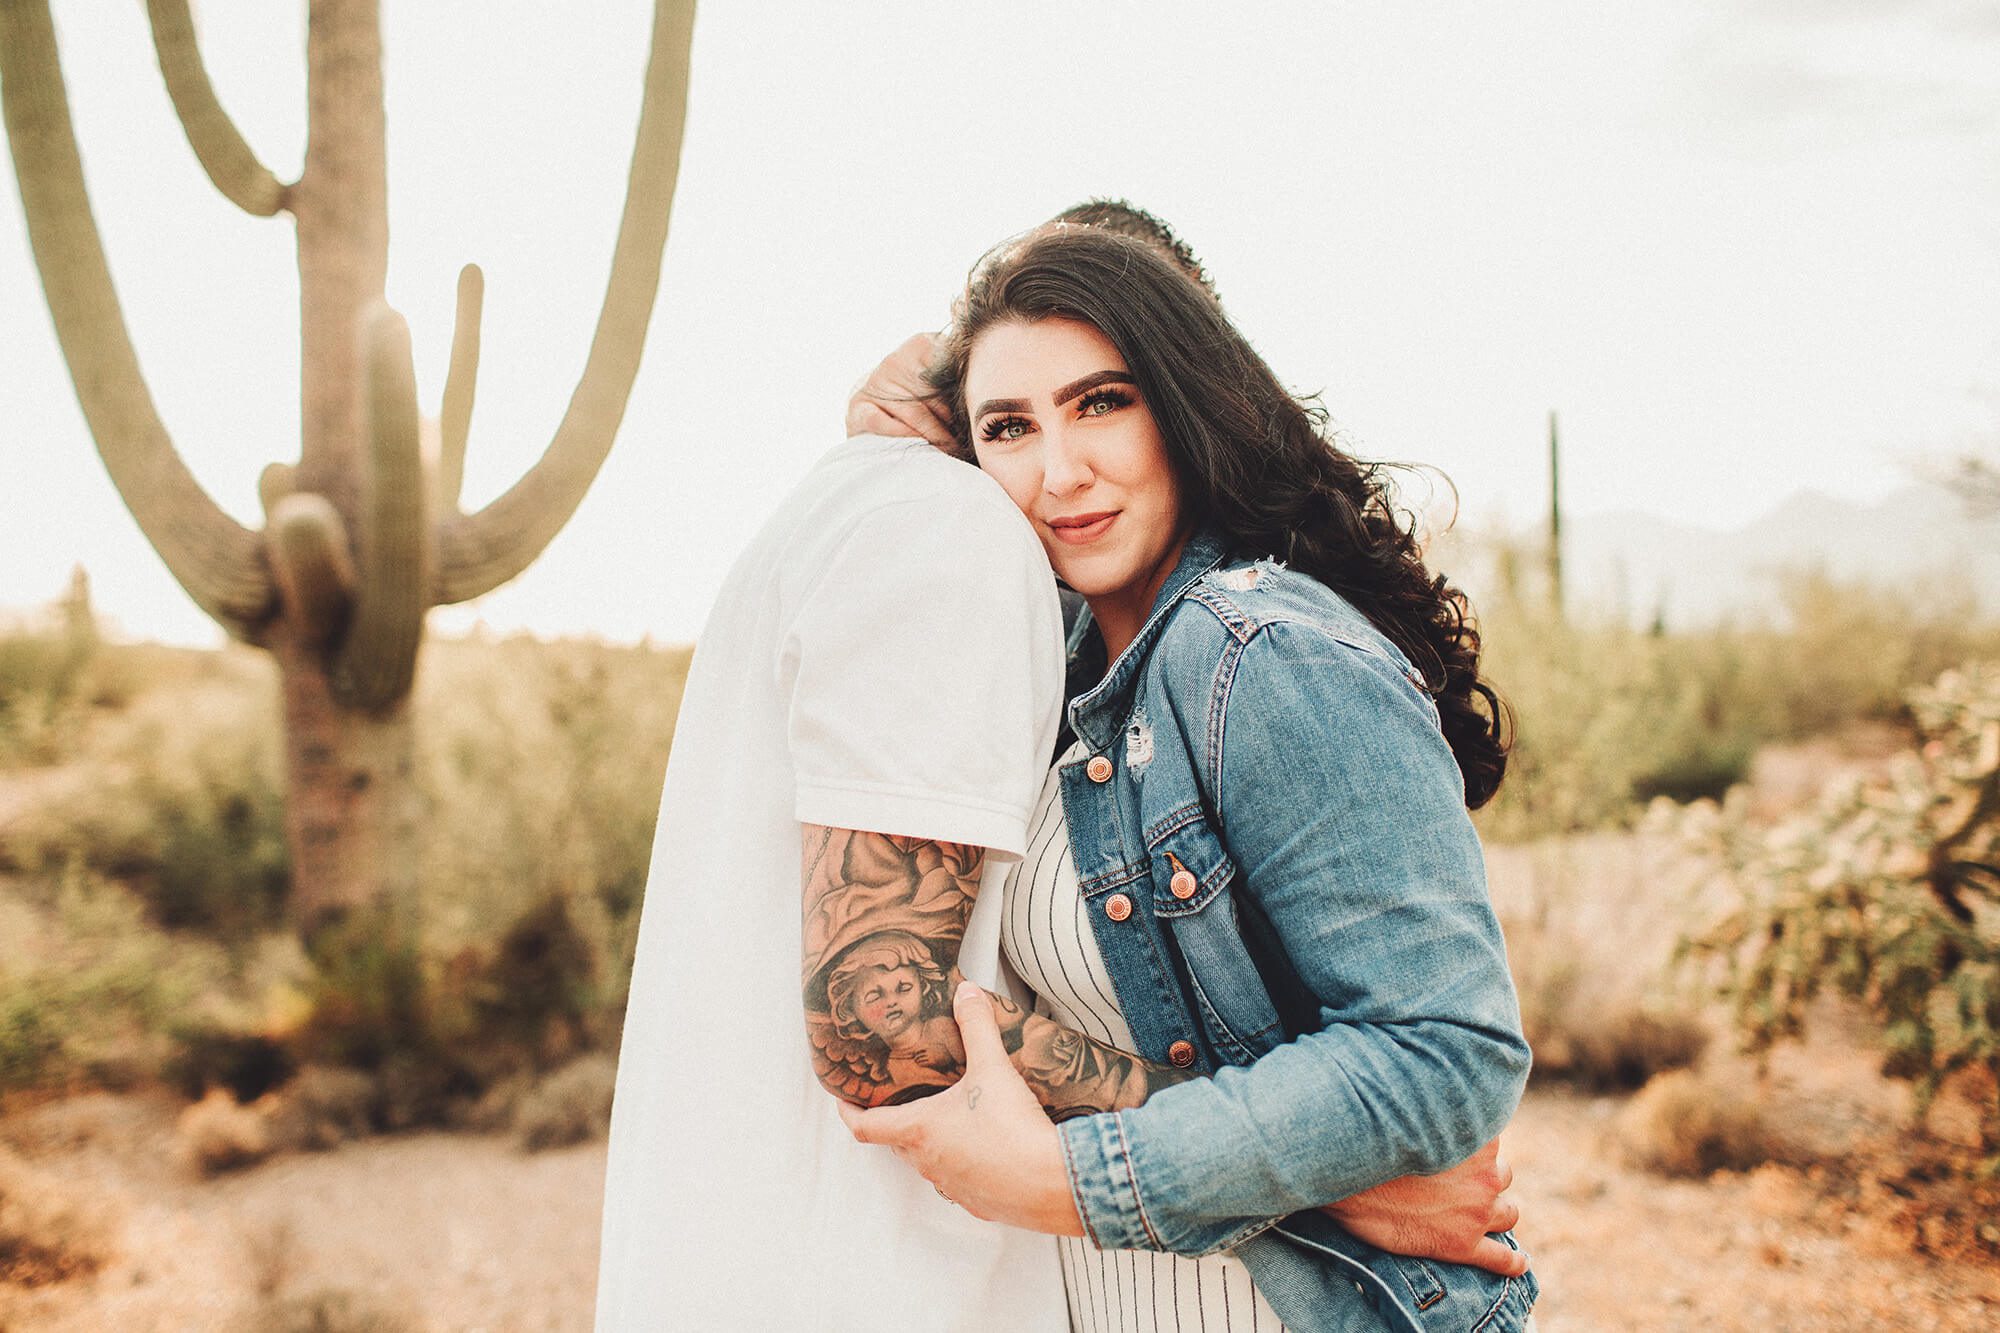 Hugs and sunsets during their desert family session